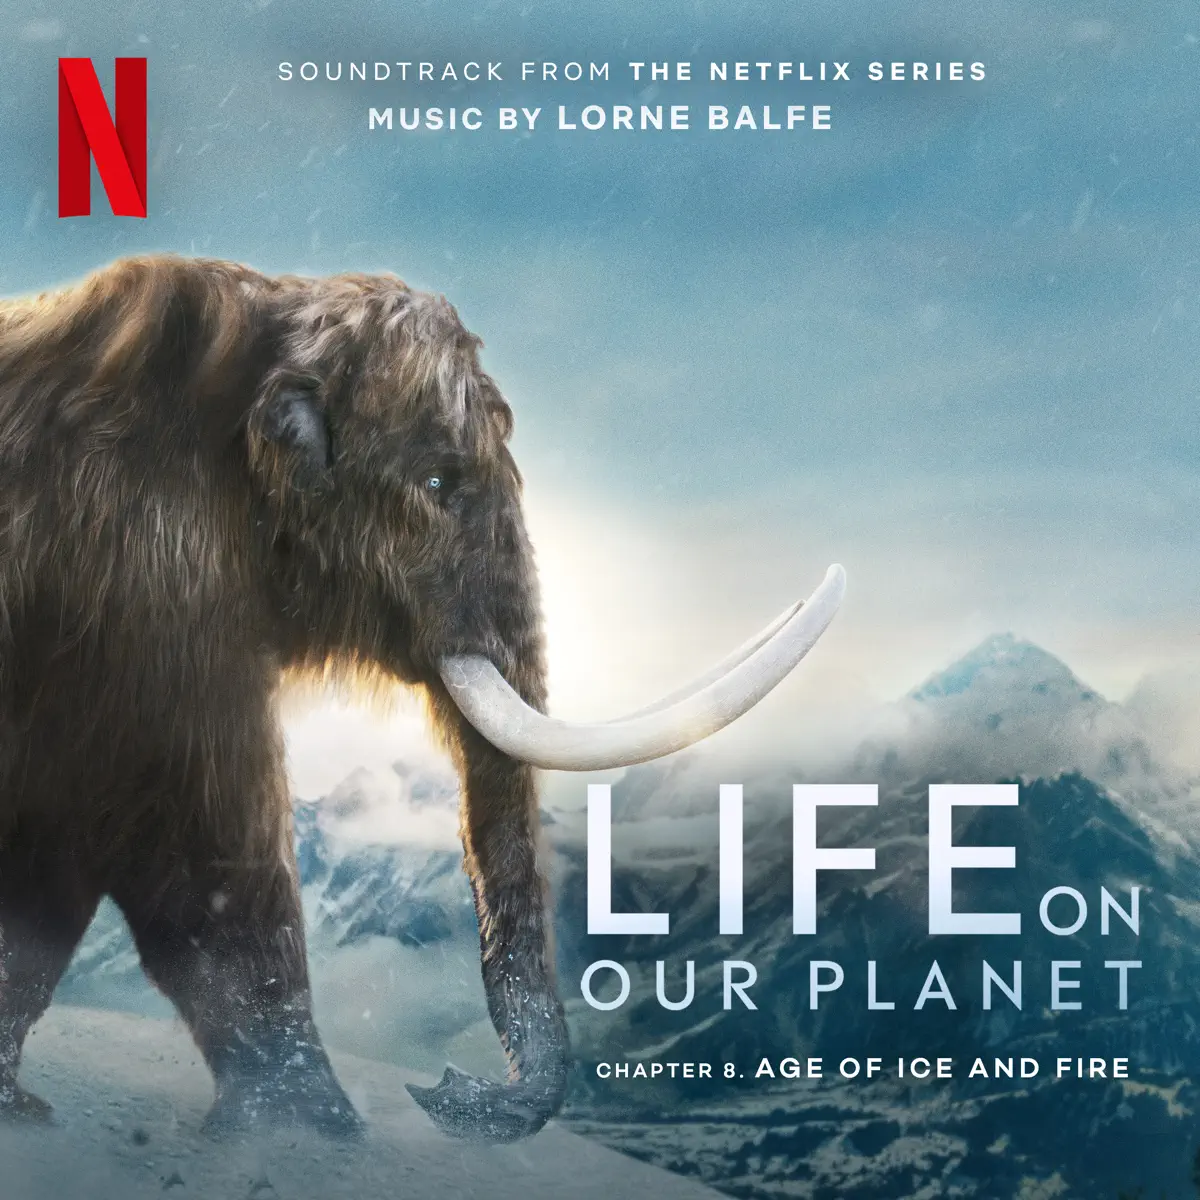 Lorne Balfe - 地球萬物軌跡 Age of Ice and Fire: Chapter 8 (Soundtrack from the Netflix Series "Life on Our Planet") (2023) [iTunes Plus AAC M4A] ​​​-新房子